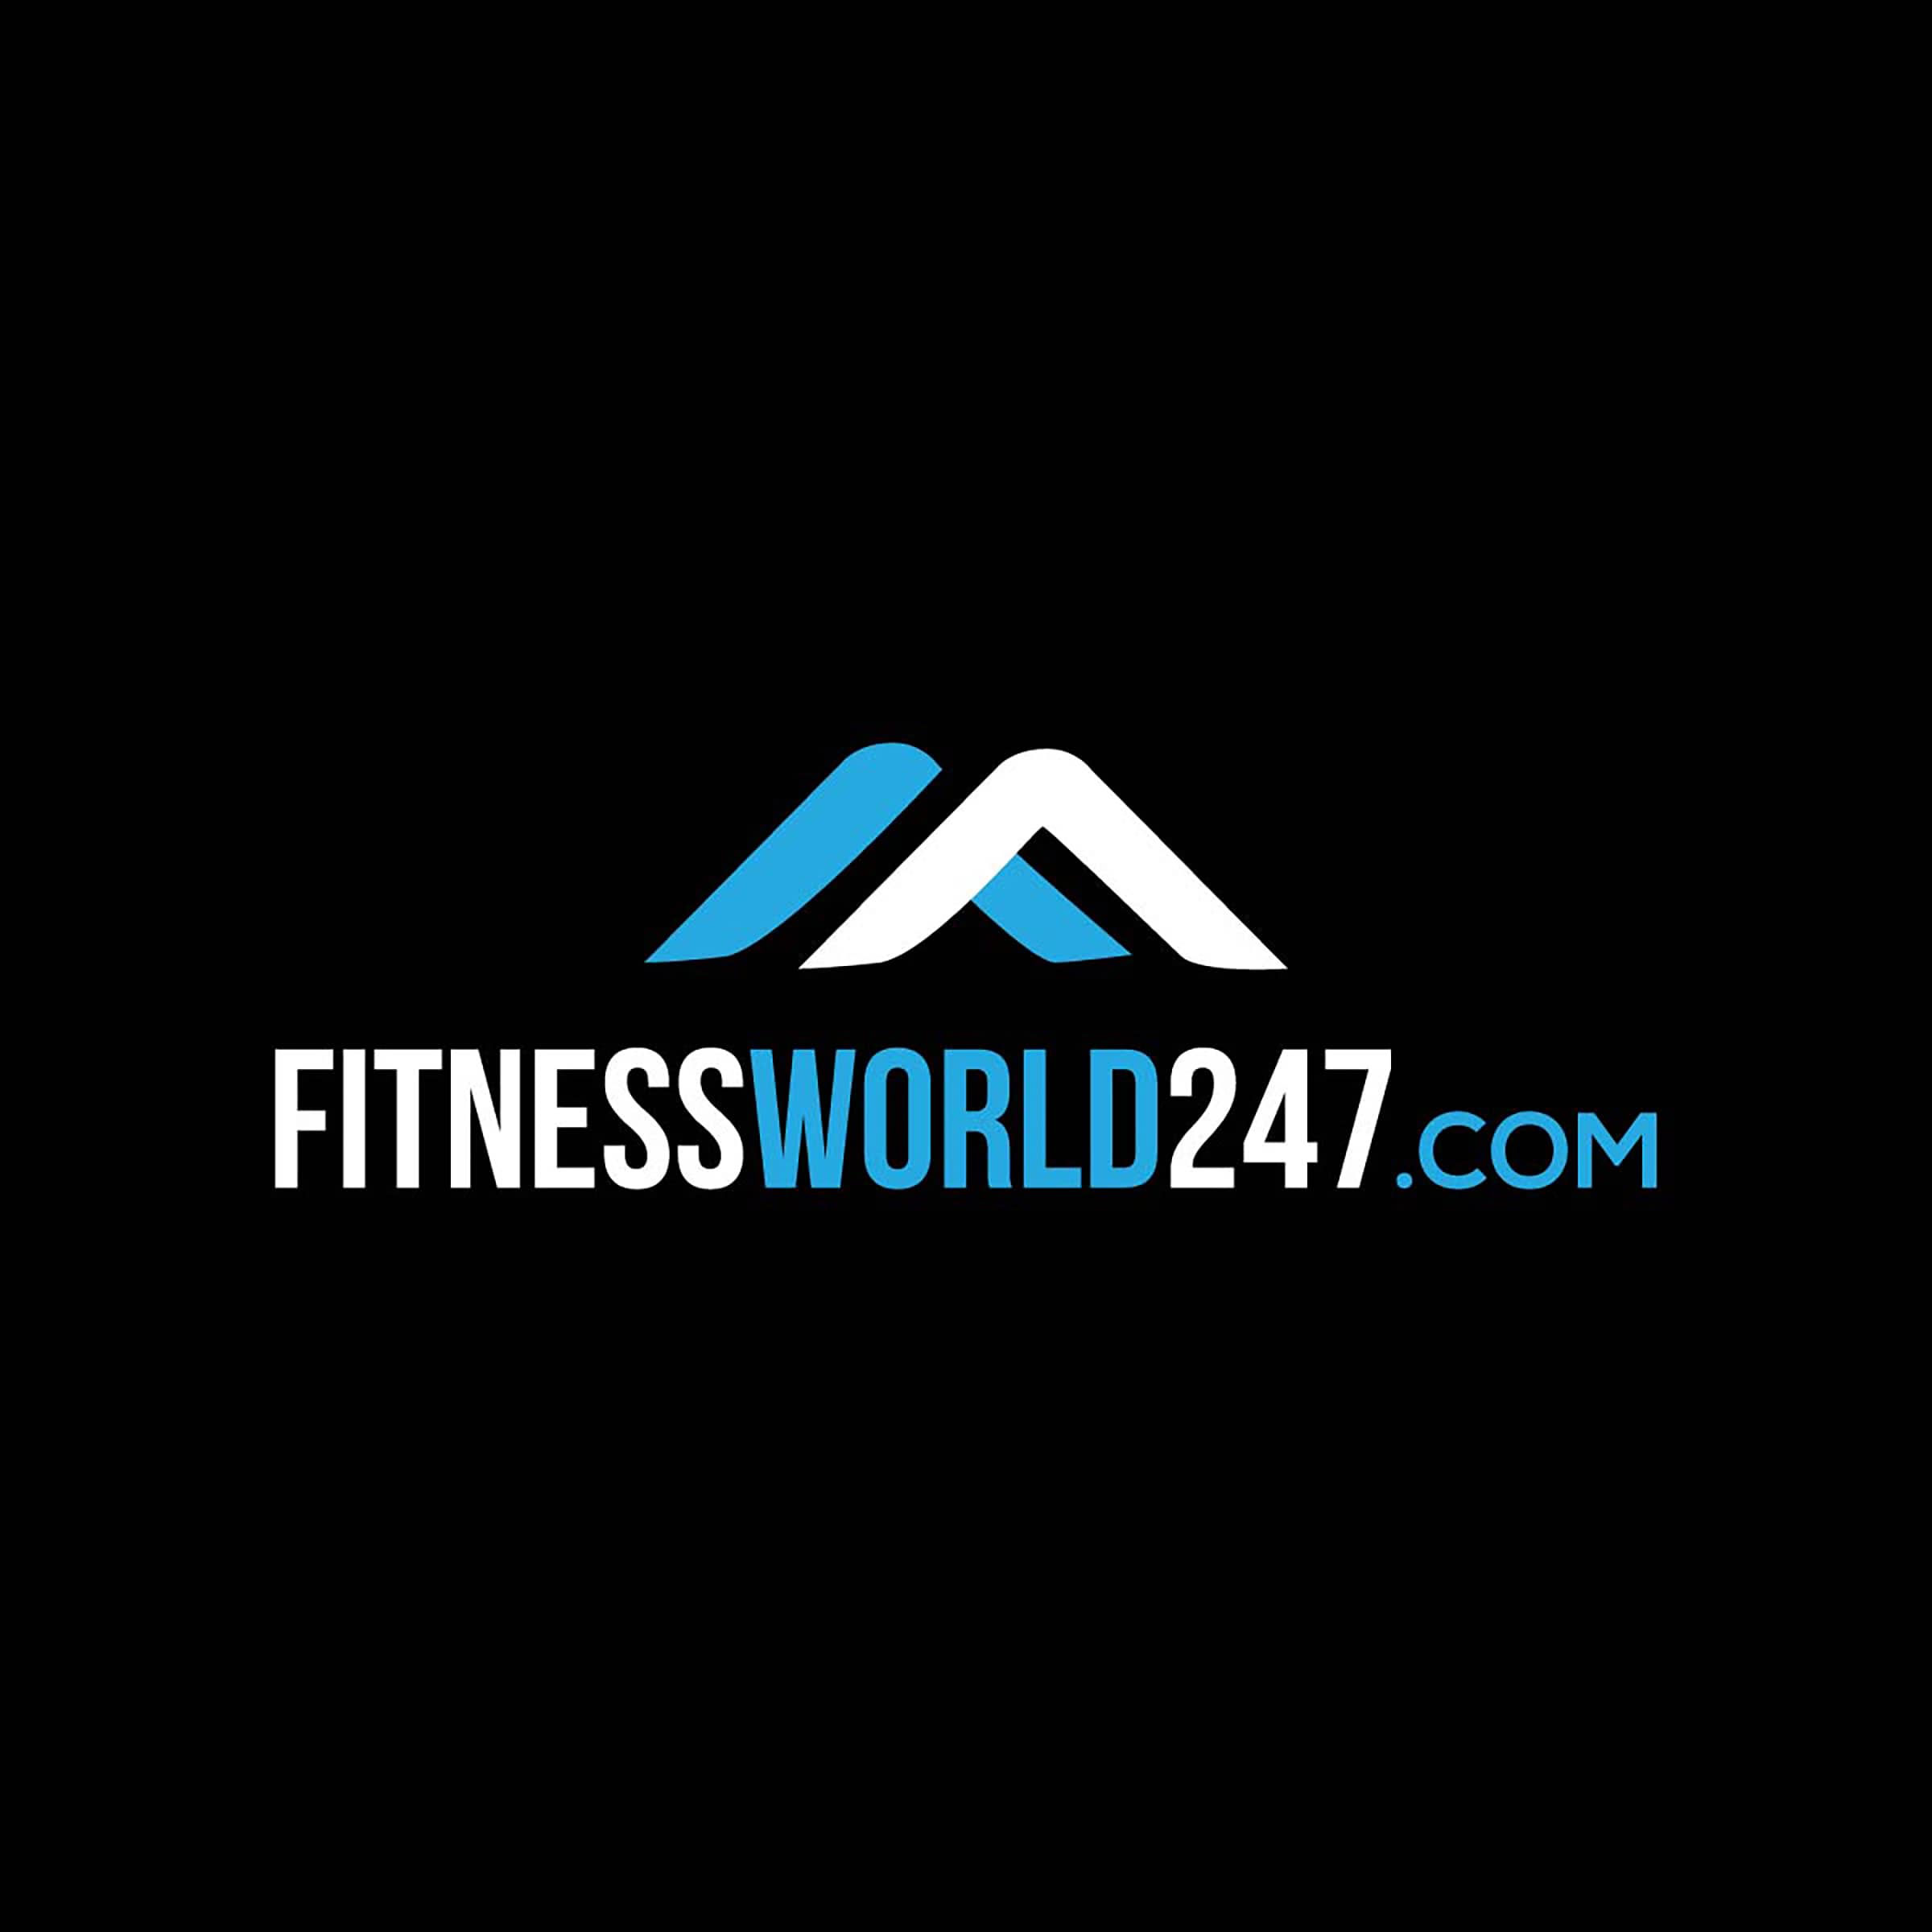 ABSTRACT LOGO DESIGN FOR FITNESS